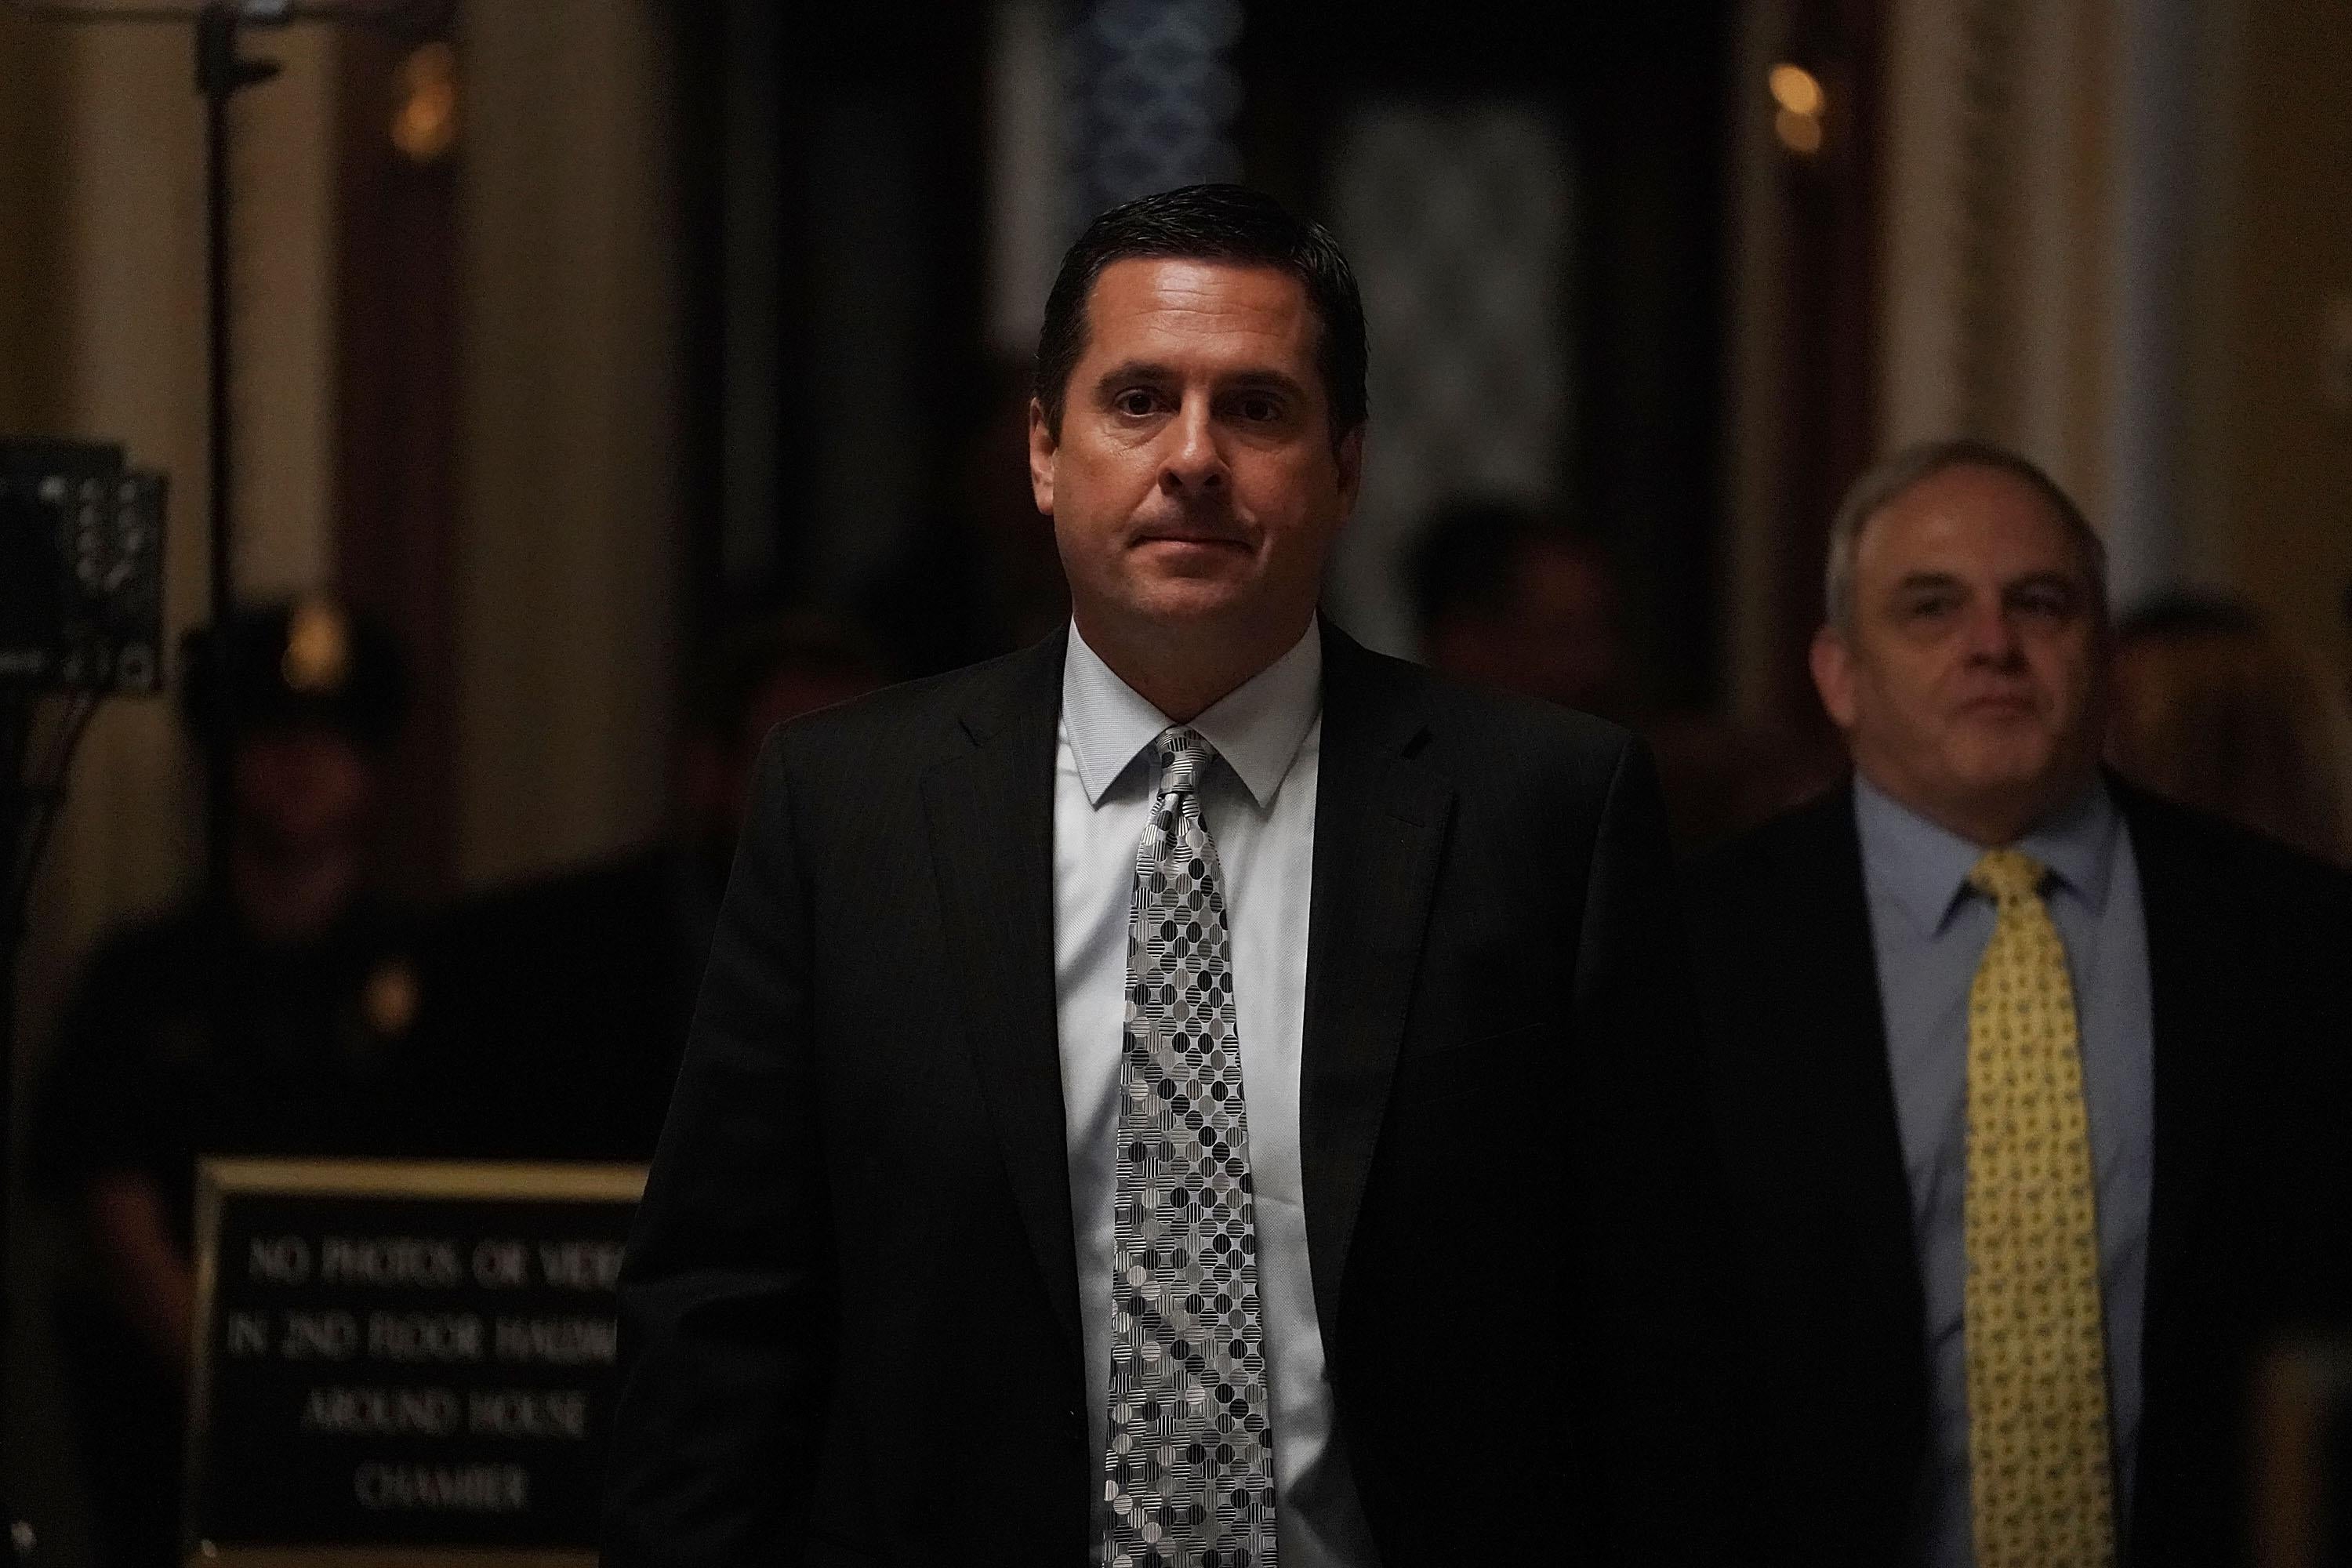 U.S. Rep. Devin Nunes, Chairman of House Intelligence Committee, passes through a hallway at the U.S. Capitol after a vote June 21, 2018 in Washington, DC.